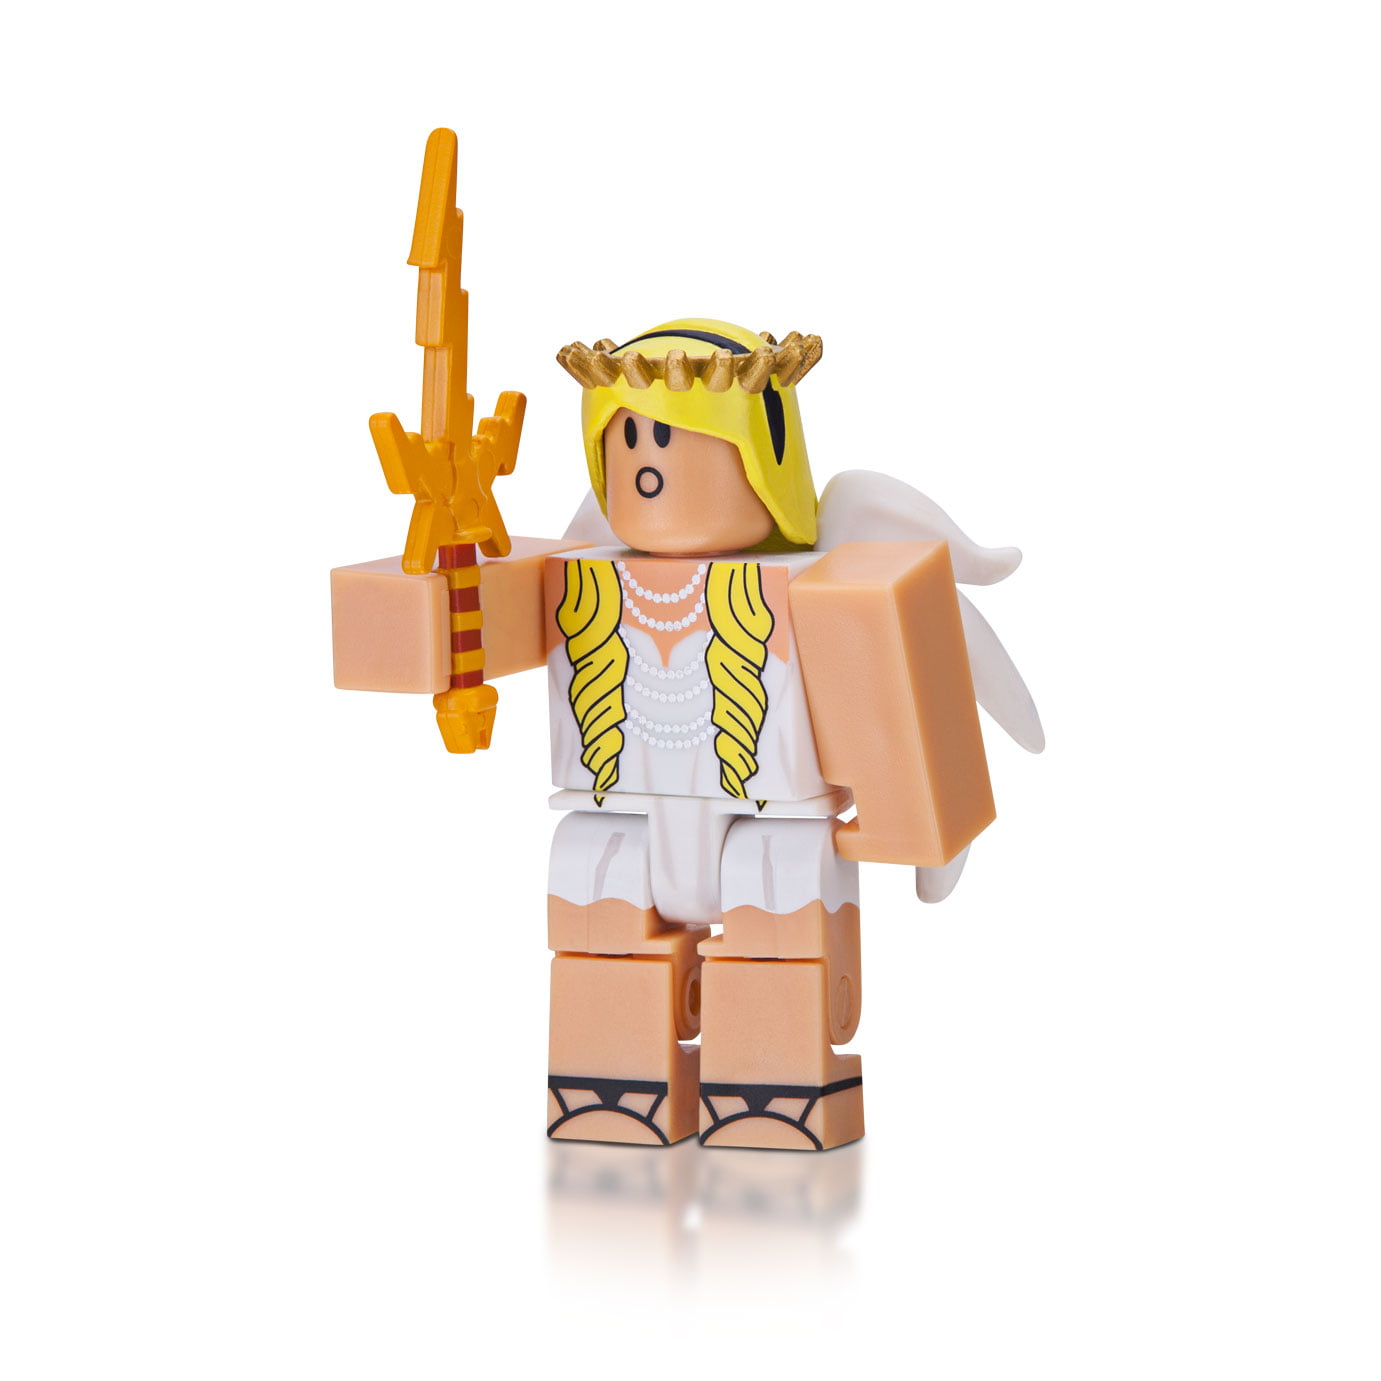 Roblox Celebrity Collection Series 2 Mystery Figure Includes 1 Figure Exclusive Virtual Item Walmart Com Walmart Com - roblox celebrity series 2 boxes